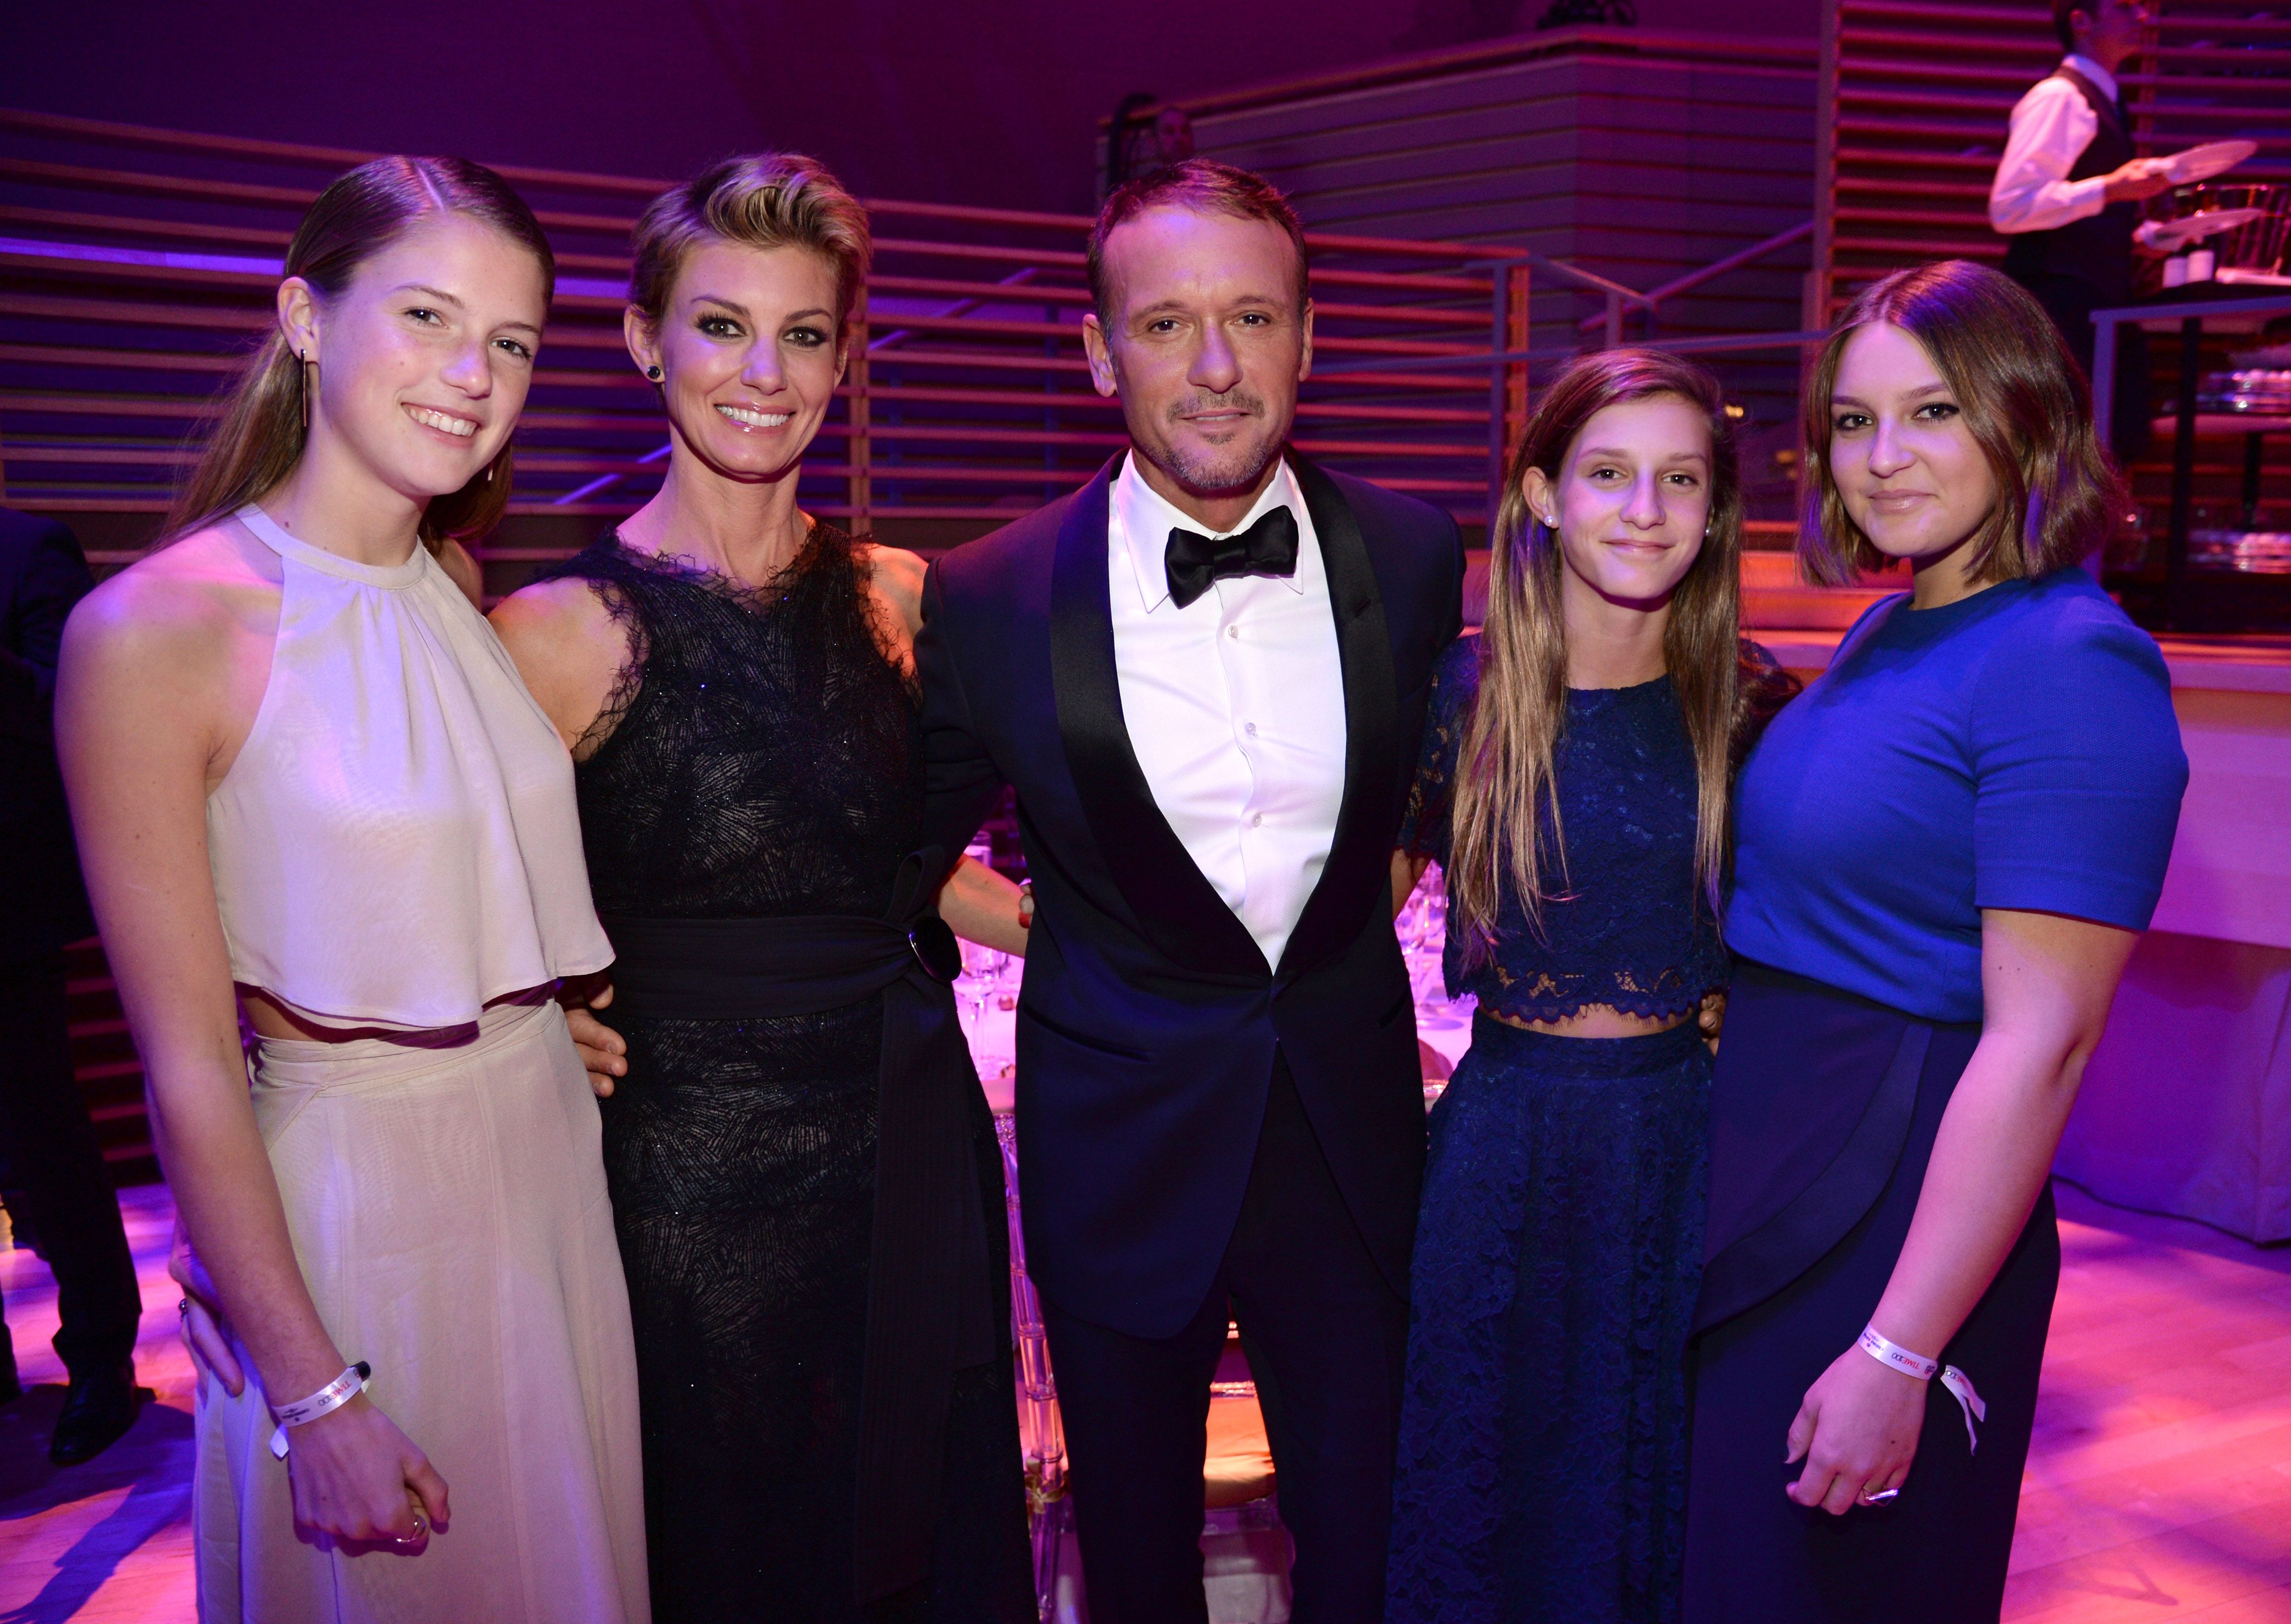 Gracie McGraw, Faith Hill, Tim McGraw, Audrey, and Maggie McGraw at TIME 100 Gala, TIME's 100 Most Influential People In The World at Jazz on April 21, 2015, in New York City | Photo: Kevin Mazur/Getty Images